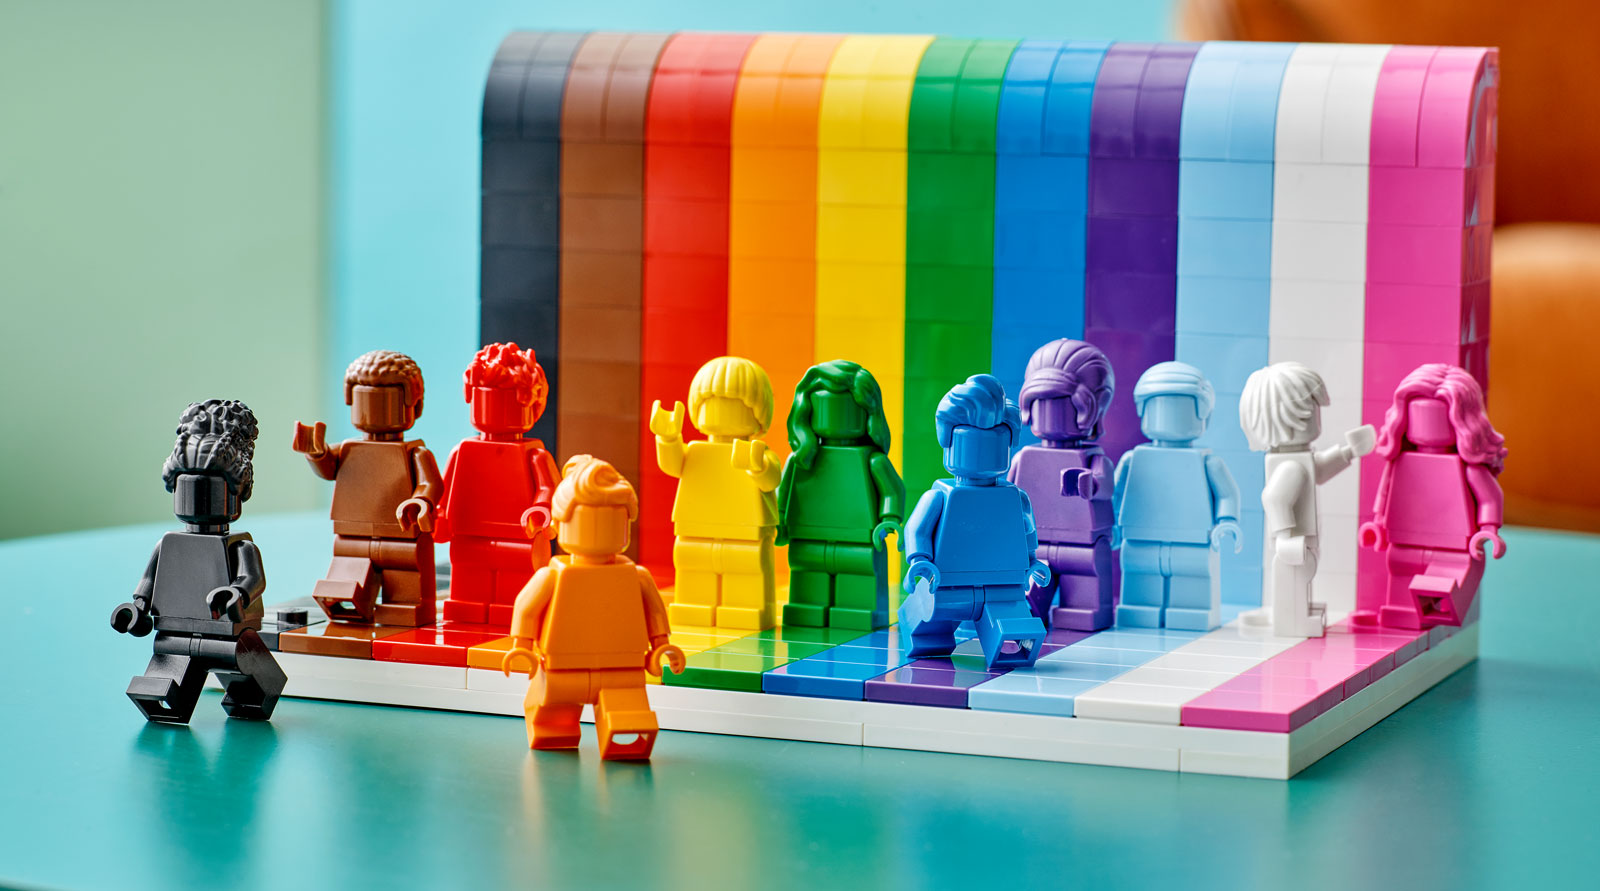 Everyone is Awesome says Lego in rainbow tribute to Pride. Wallpaper*